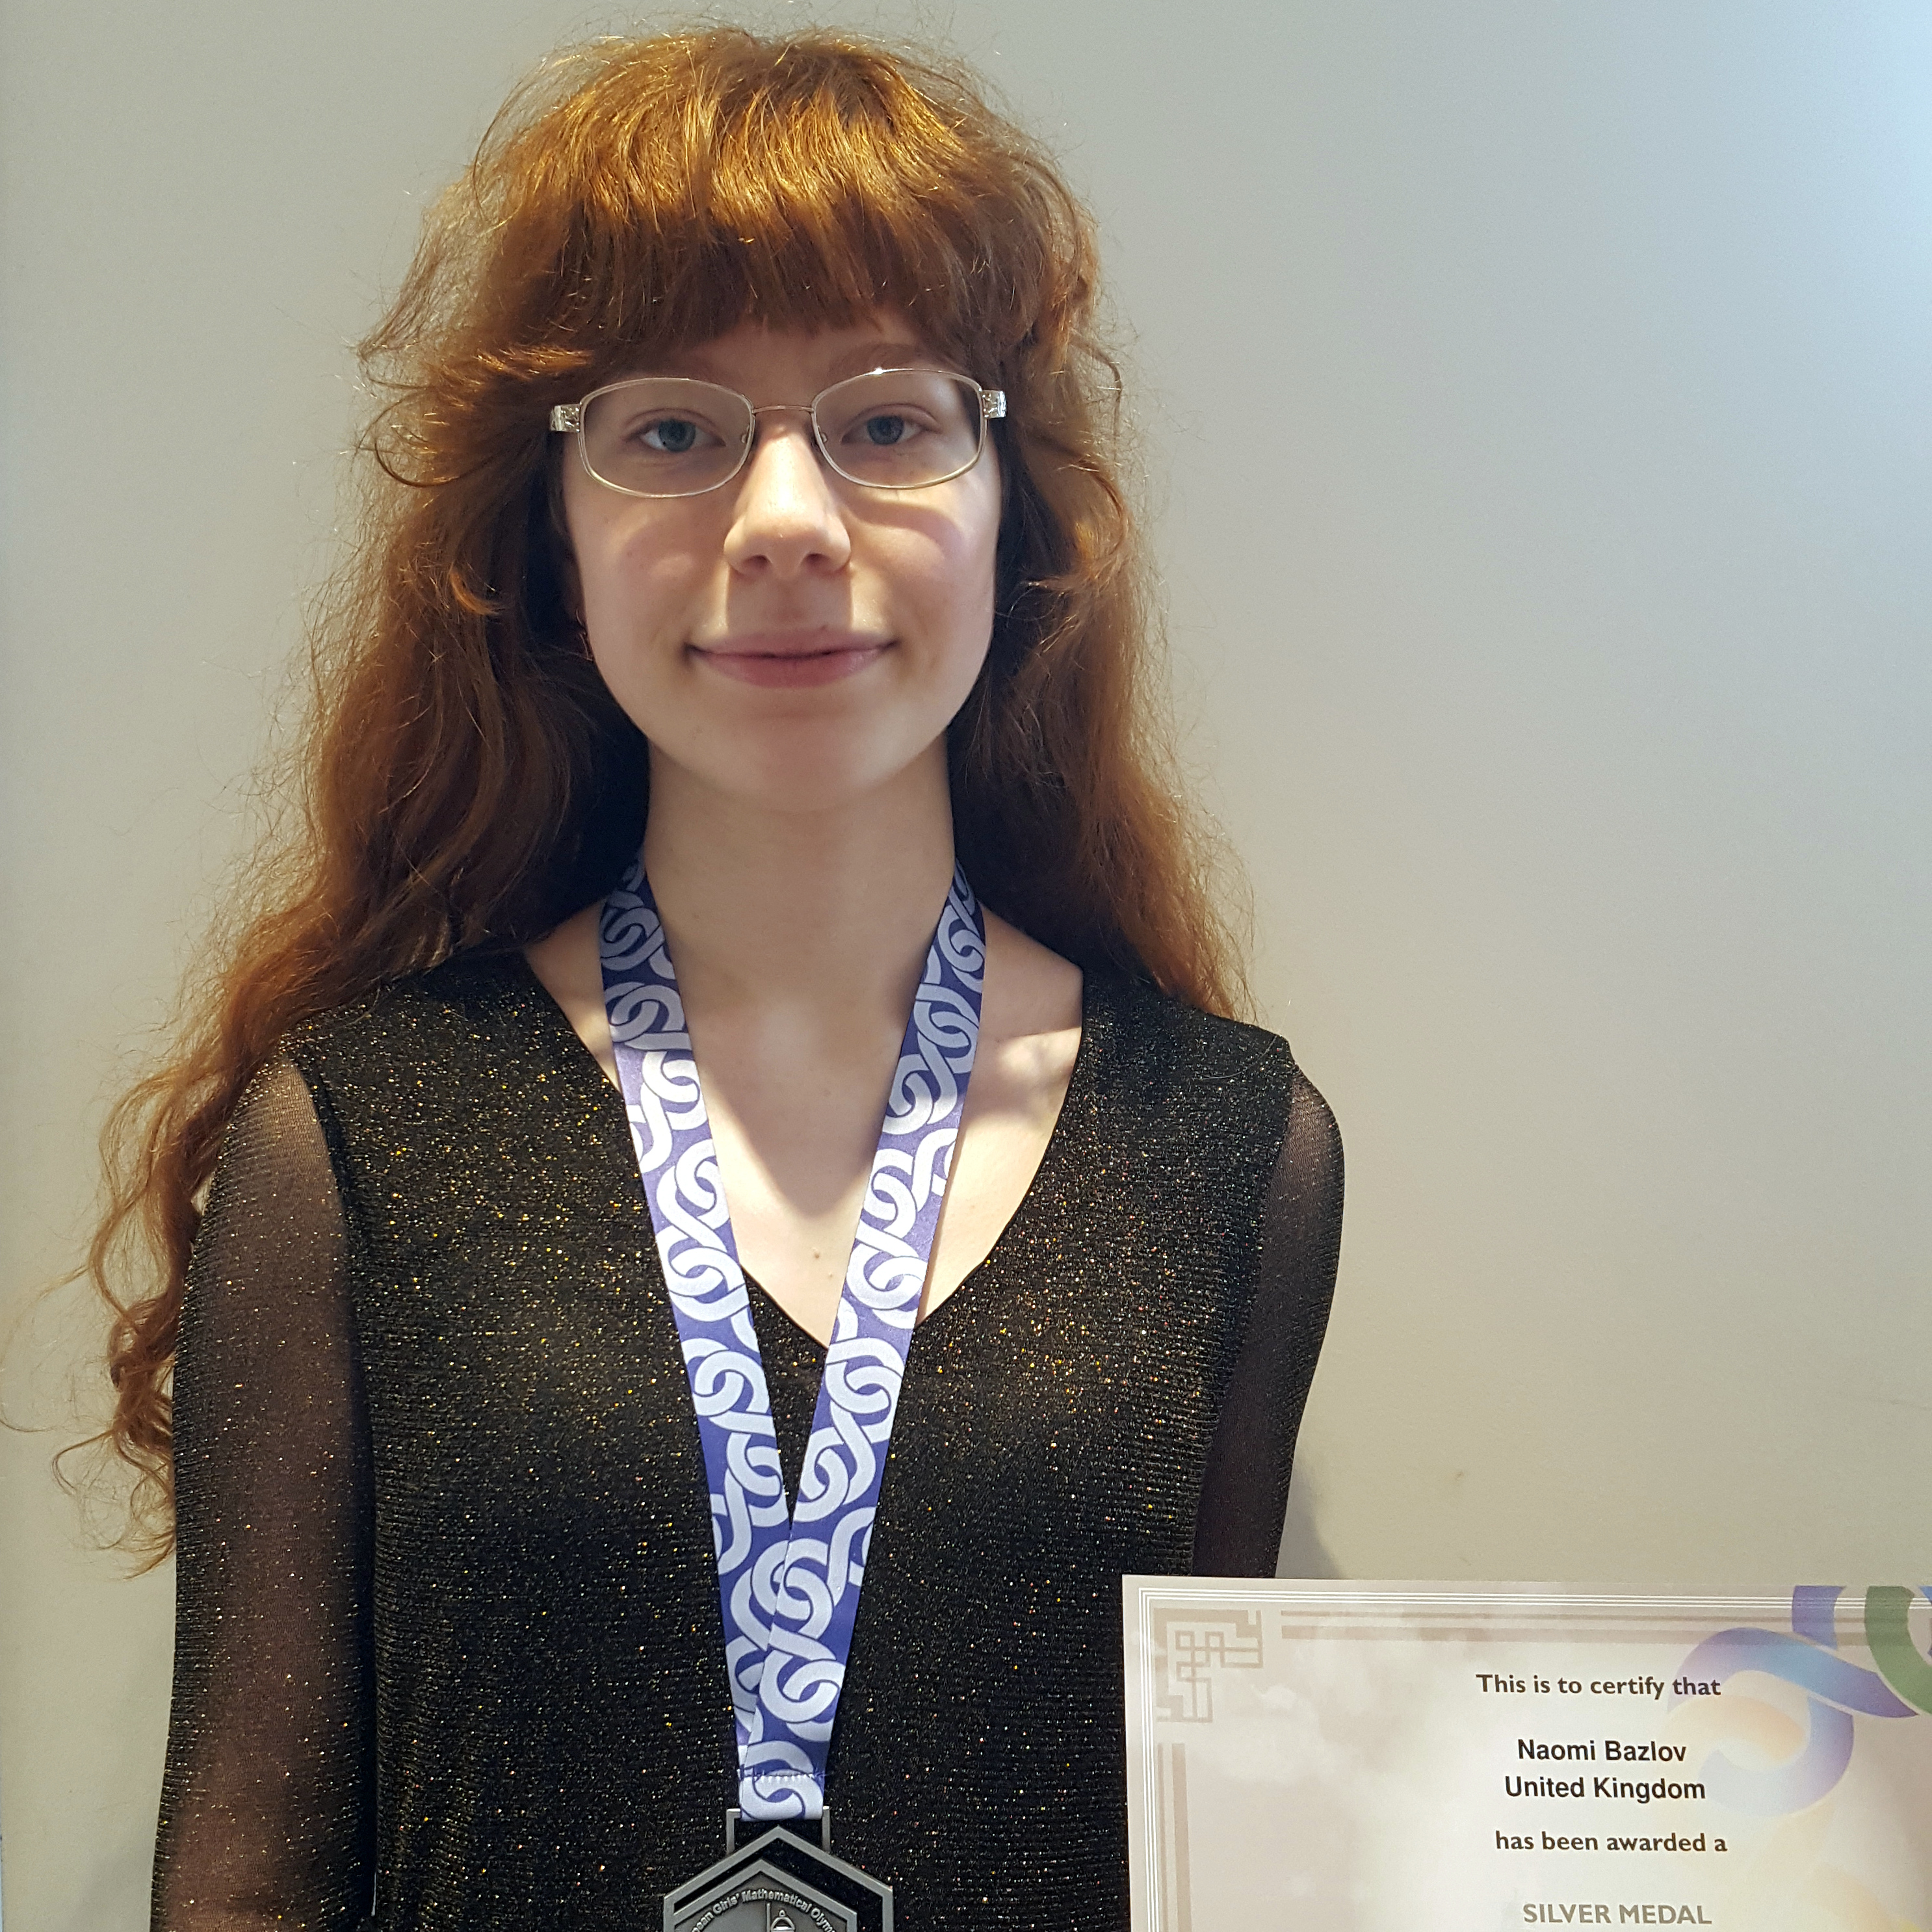 Naomi - silver medal at the European Girls Mathematical Olympiad 2020